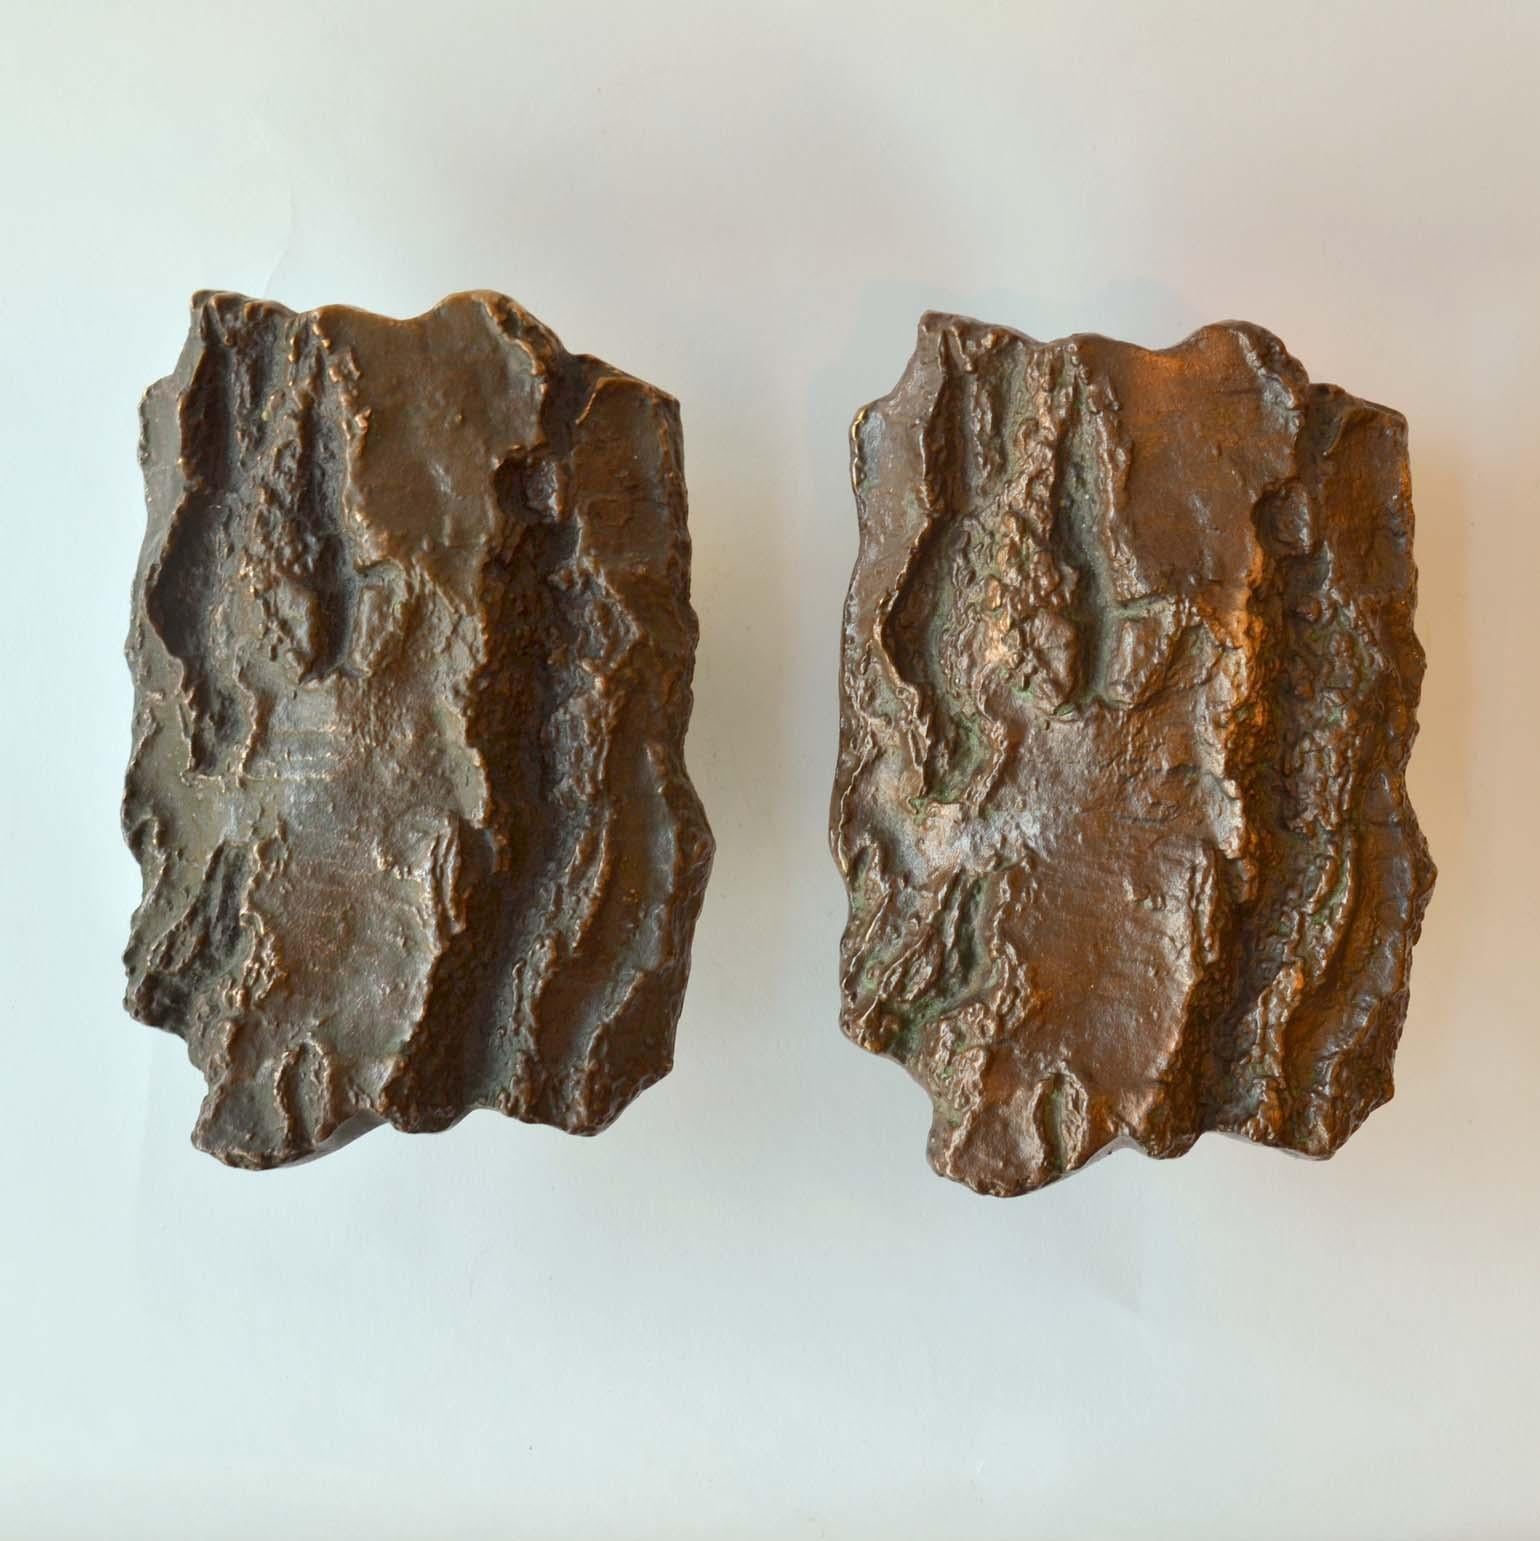  A set of two artistic brutalist bronze door handles with textured tree bark design, European 1970s that give real personality to a house. The handles are heavily textured and slightly curved, with lots of movement and depth in the design. They both